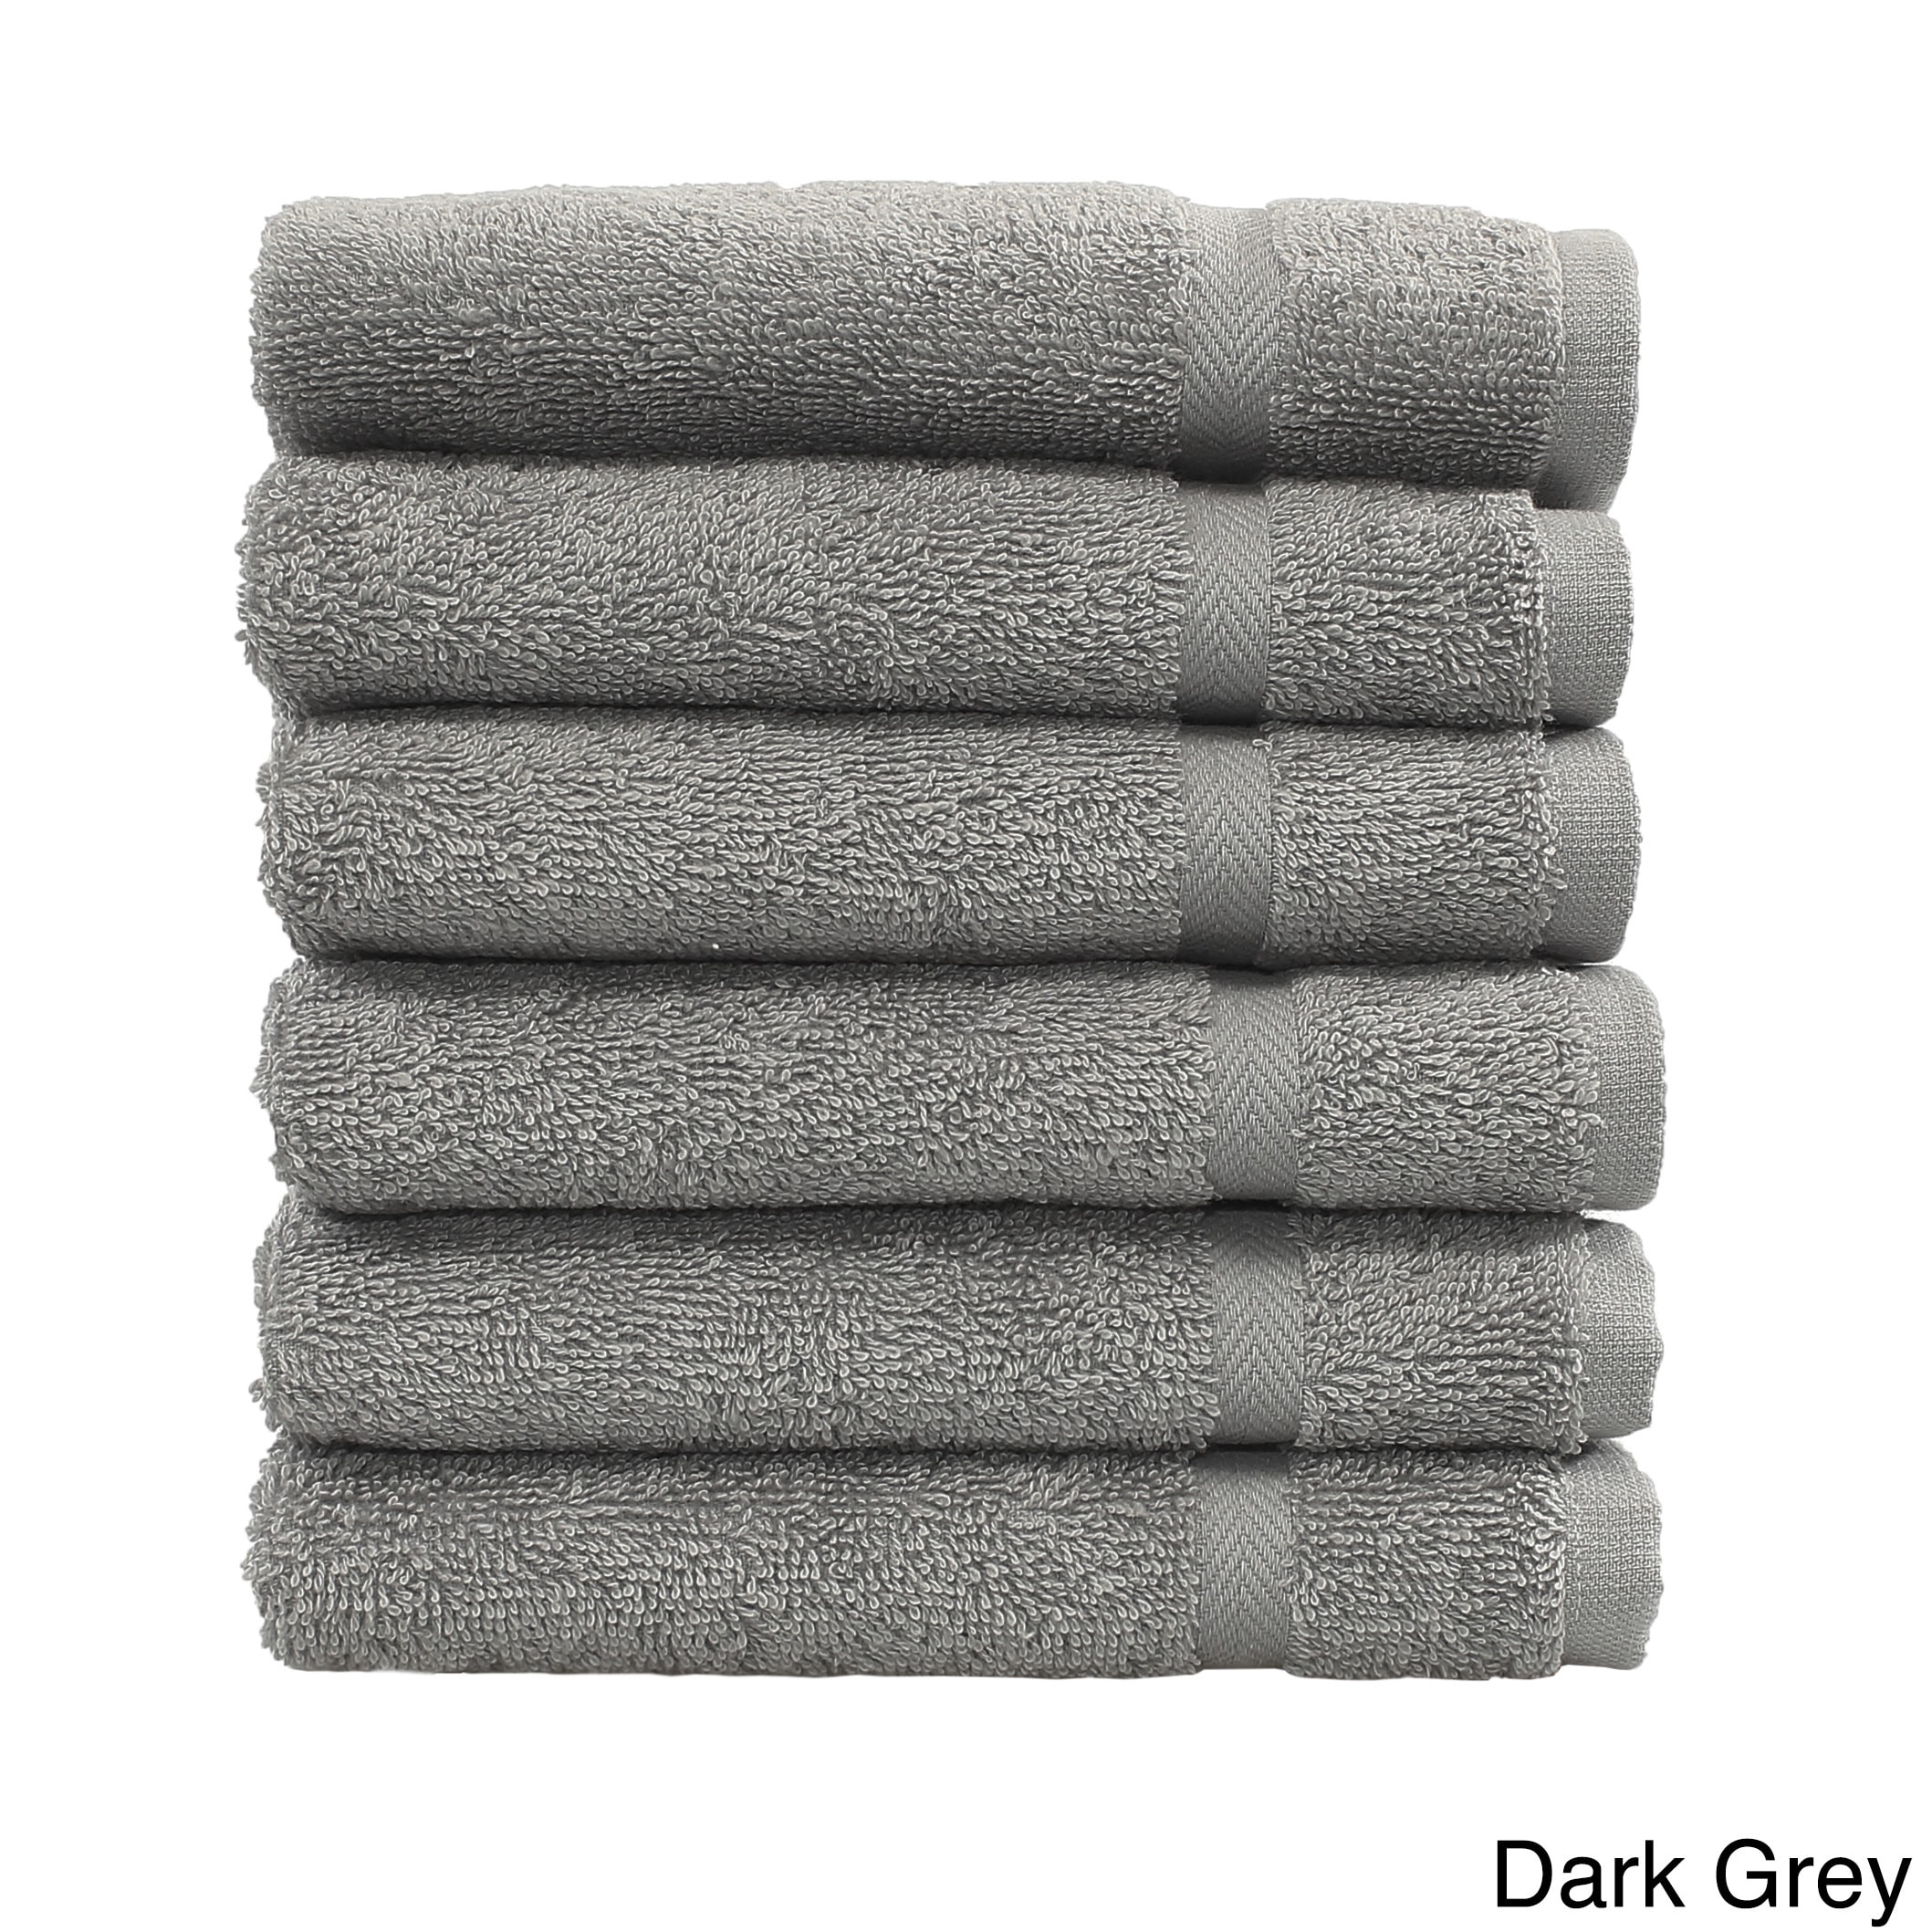 Authentic Hotel and Spa Turkish Cotton Circles Embroidered Dark Grey  2-piece Bath Towel Set - Bed Bath & Beyond - 22160847